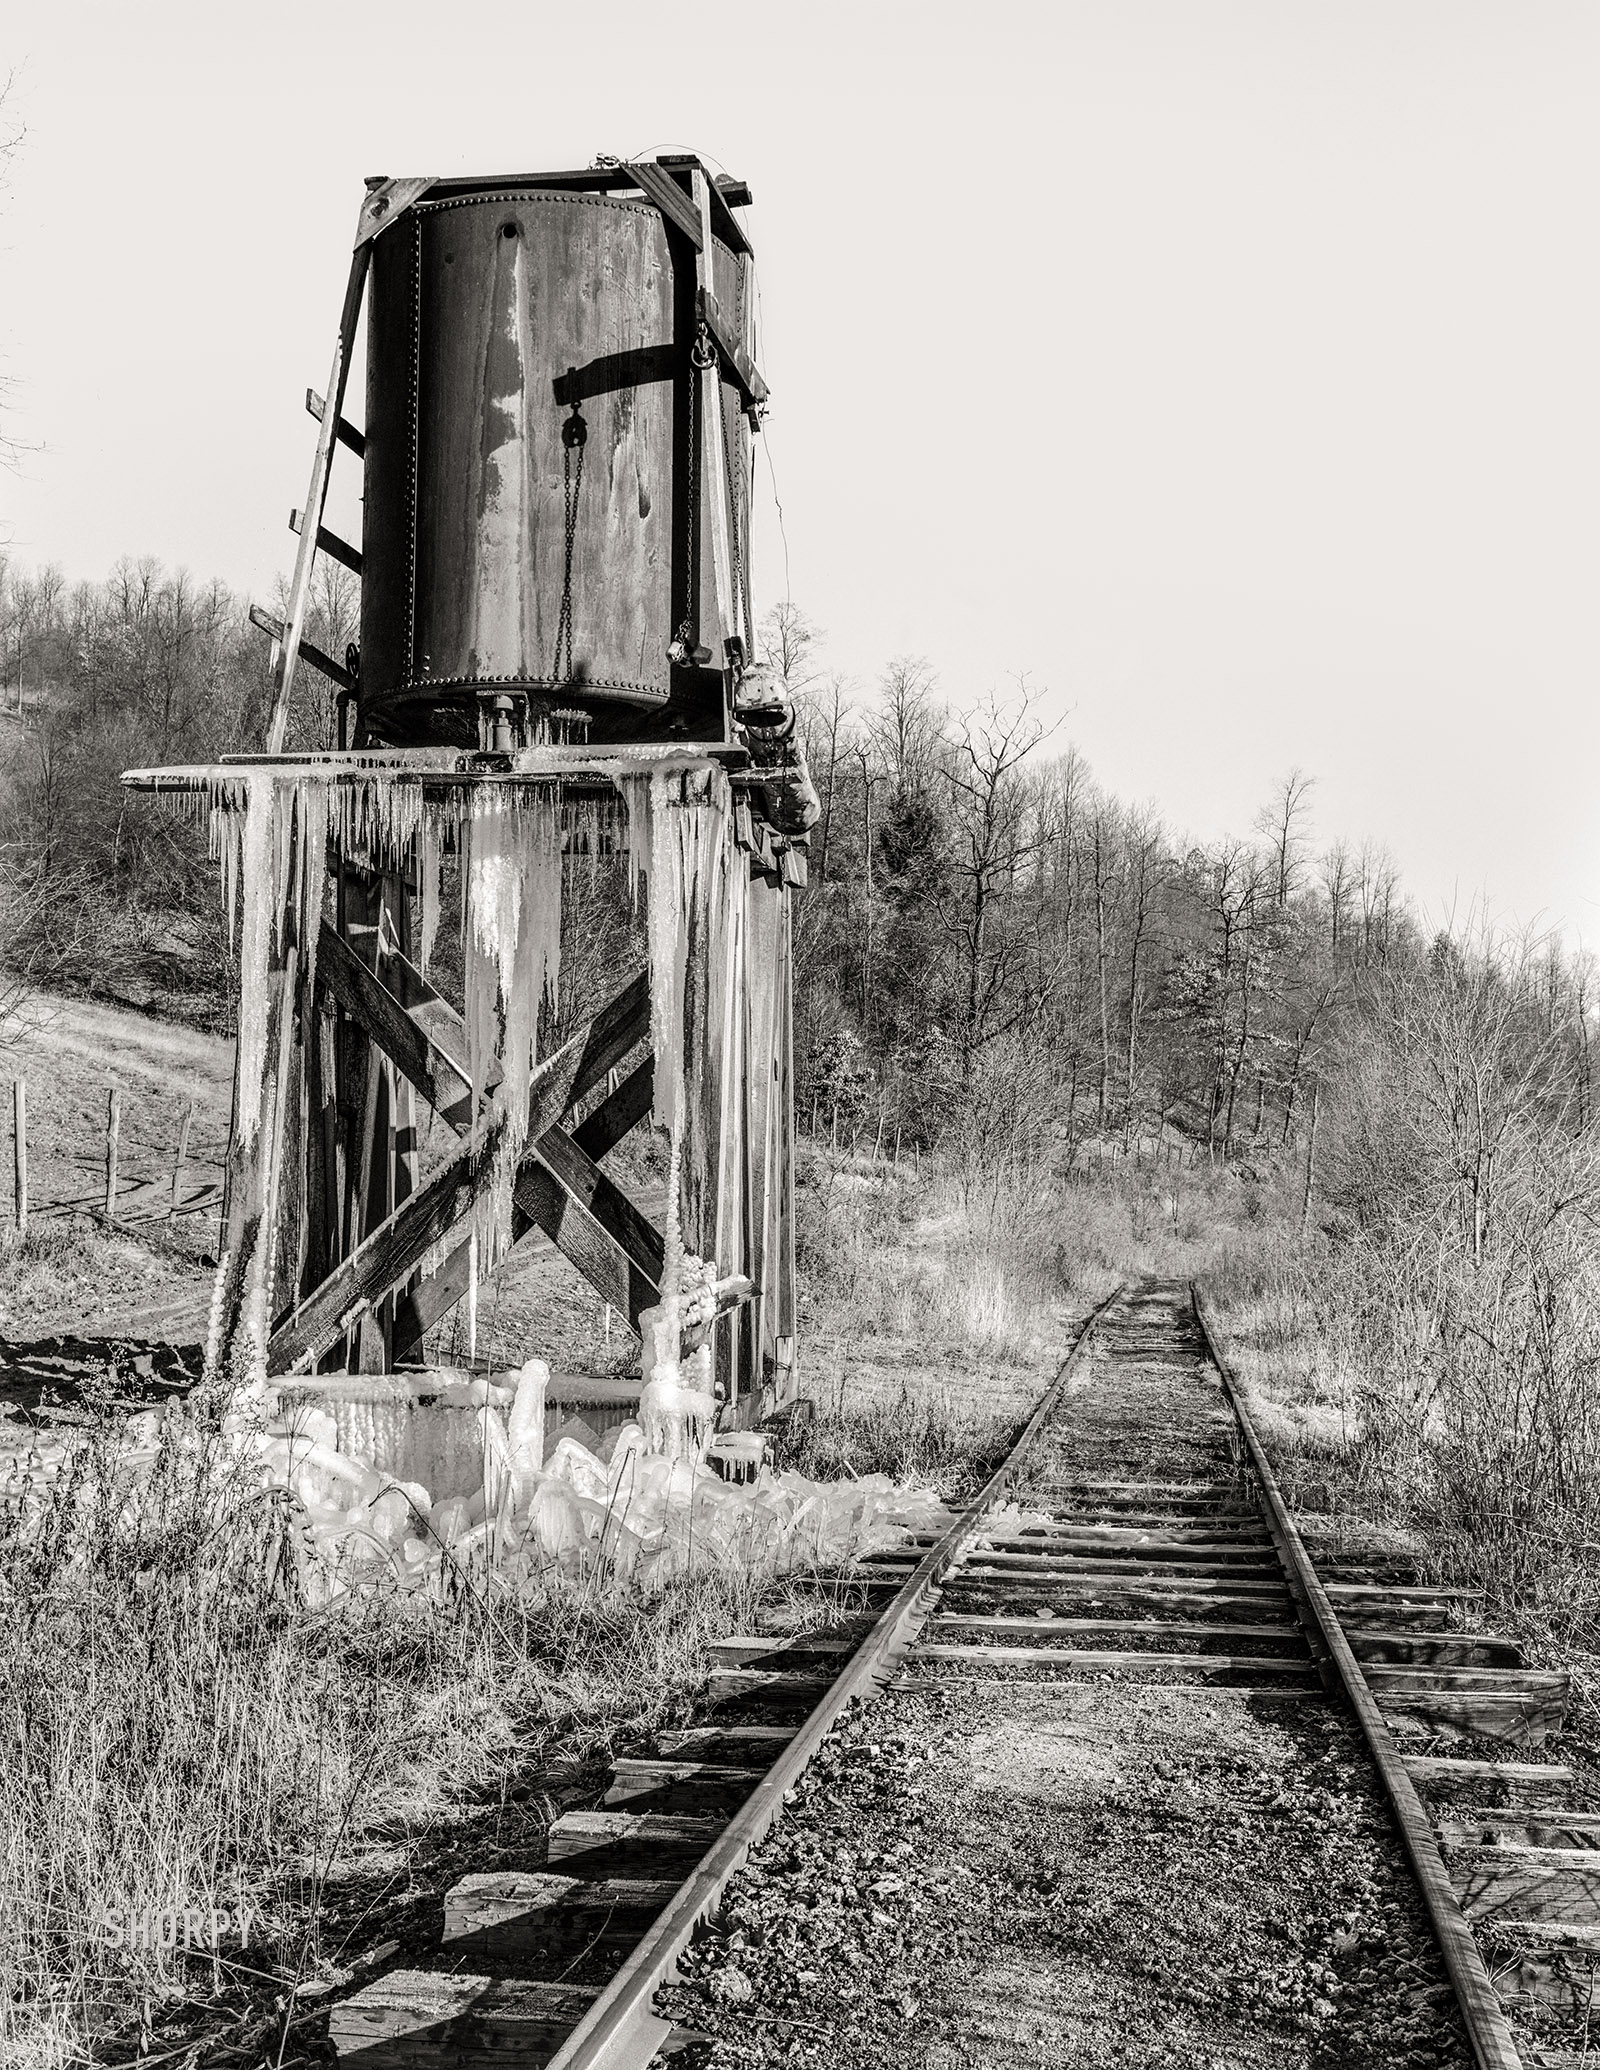 December 1937. "Water tower on railroad through Jennings, Maryland. The train now runs only once a week." Medium format acetate negative by Arthur Rothstein. View full size.